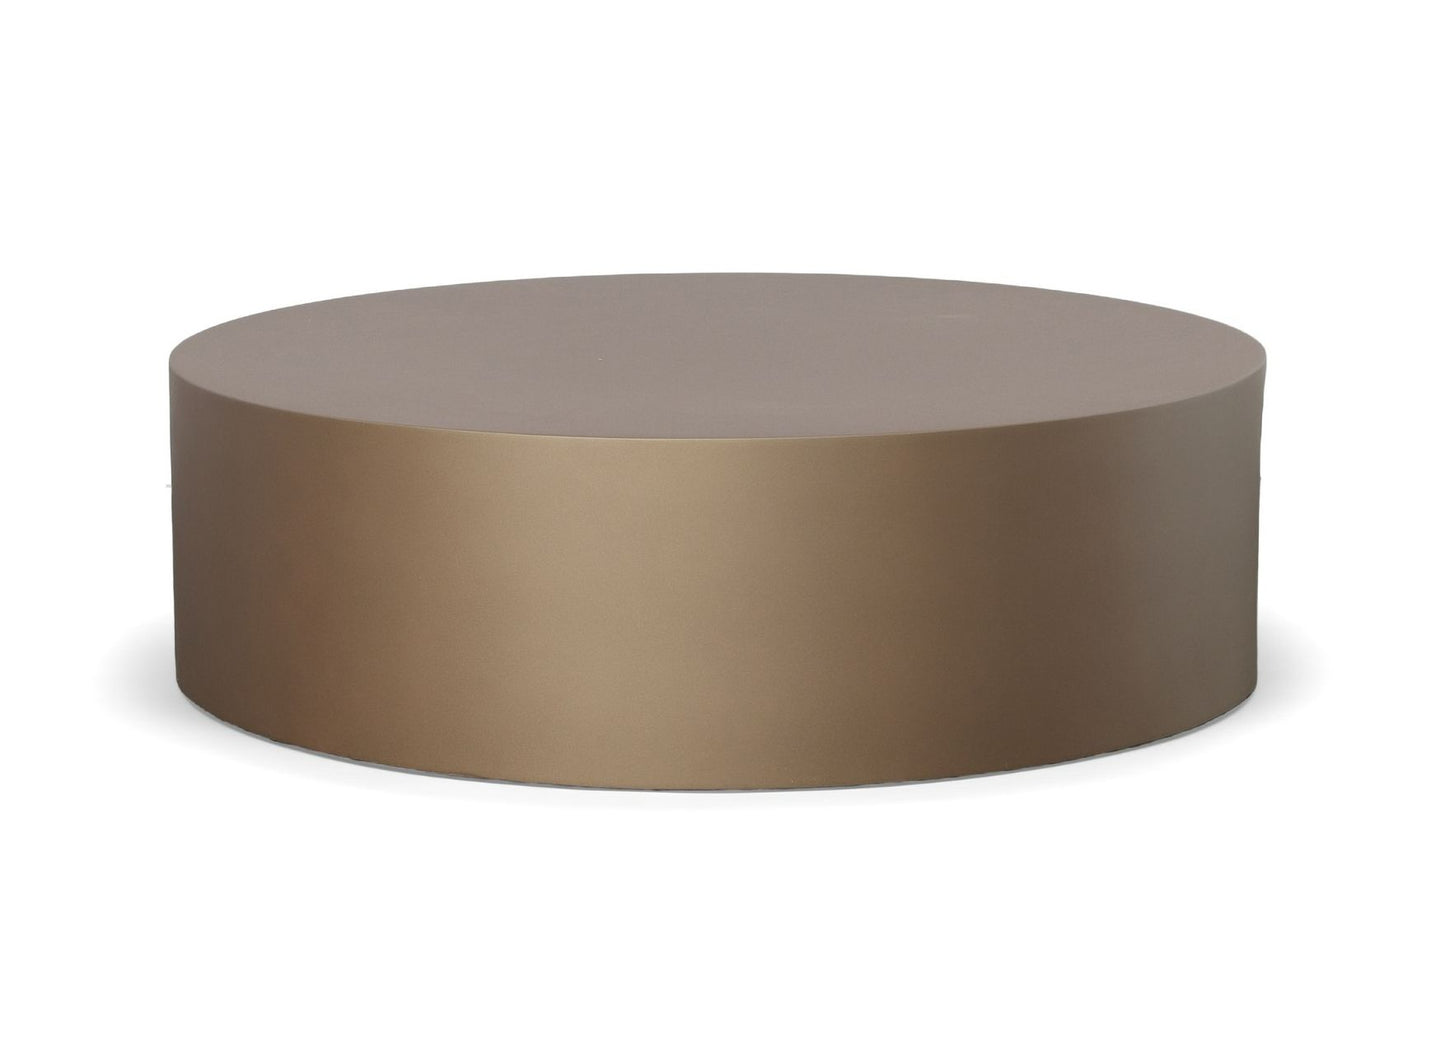 Modrest - Laura Modern Round Large Coffee Table